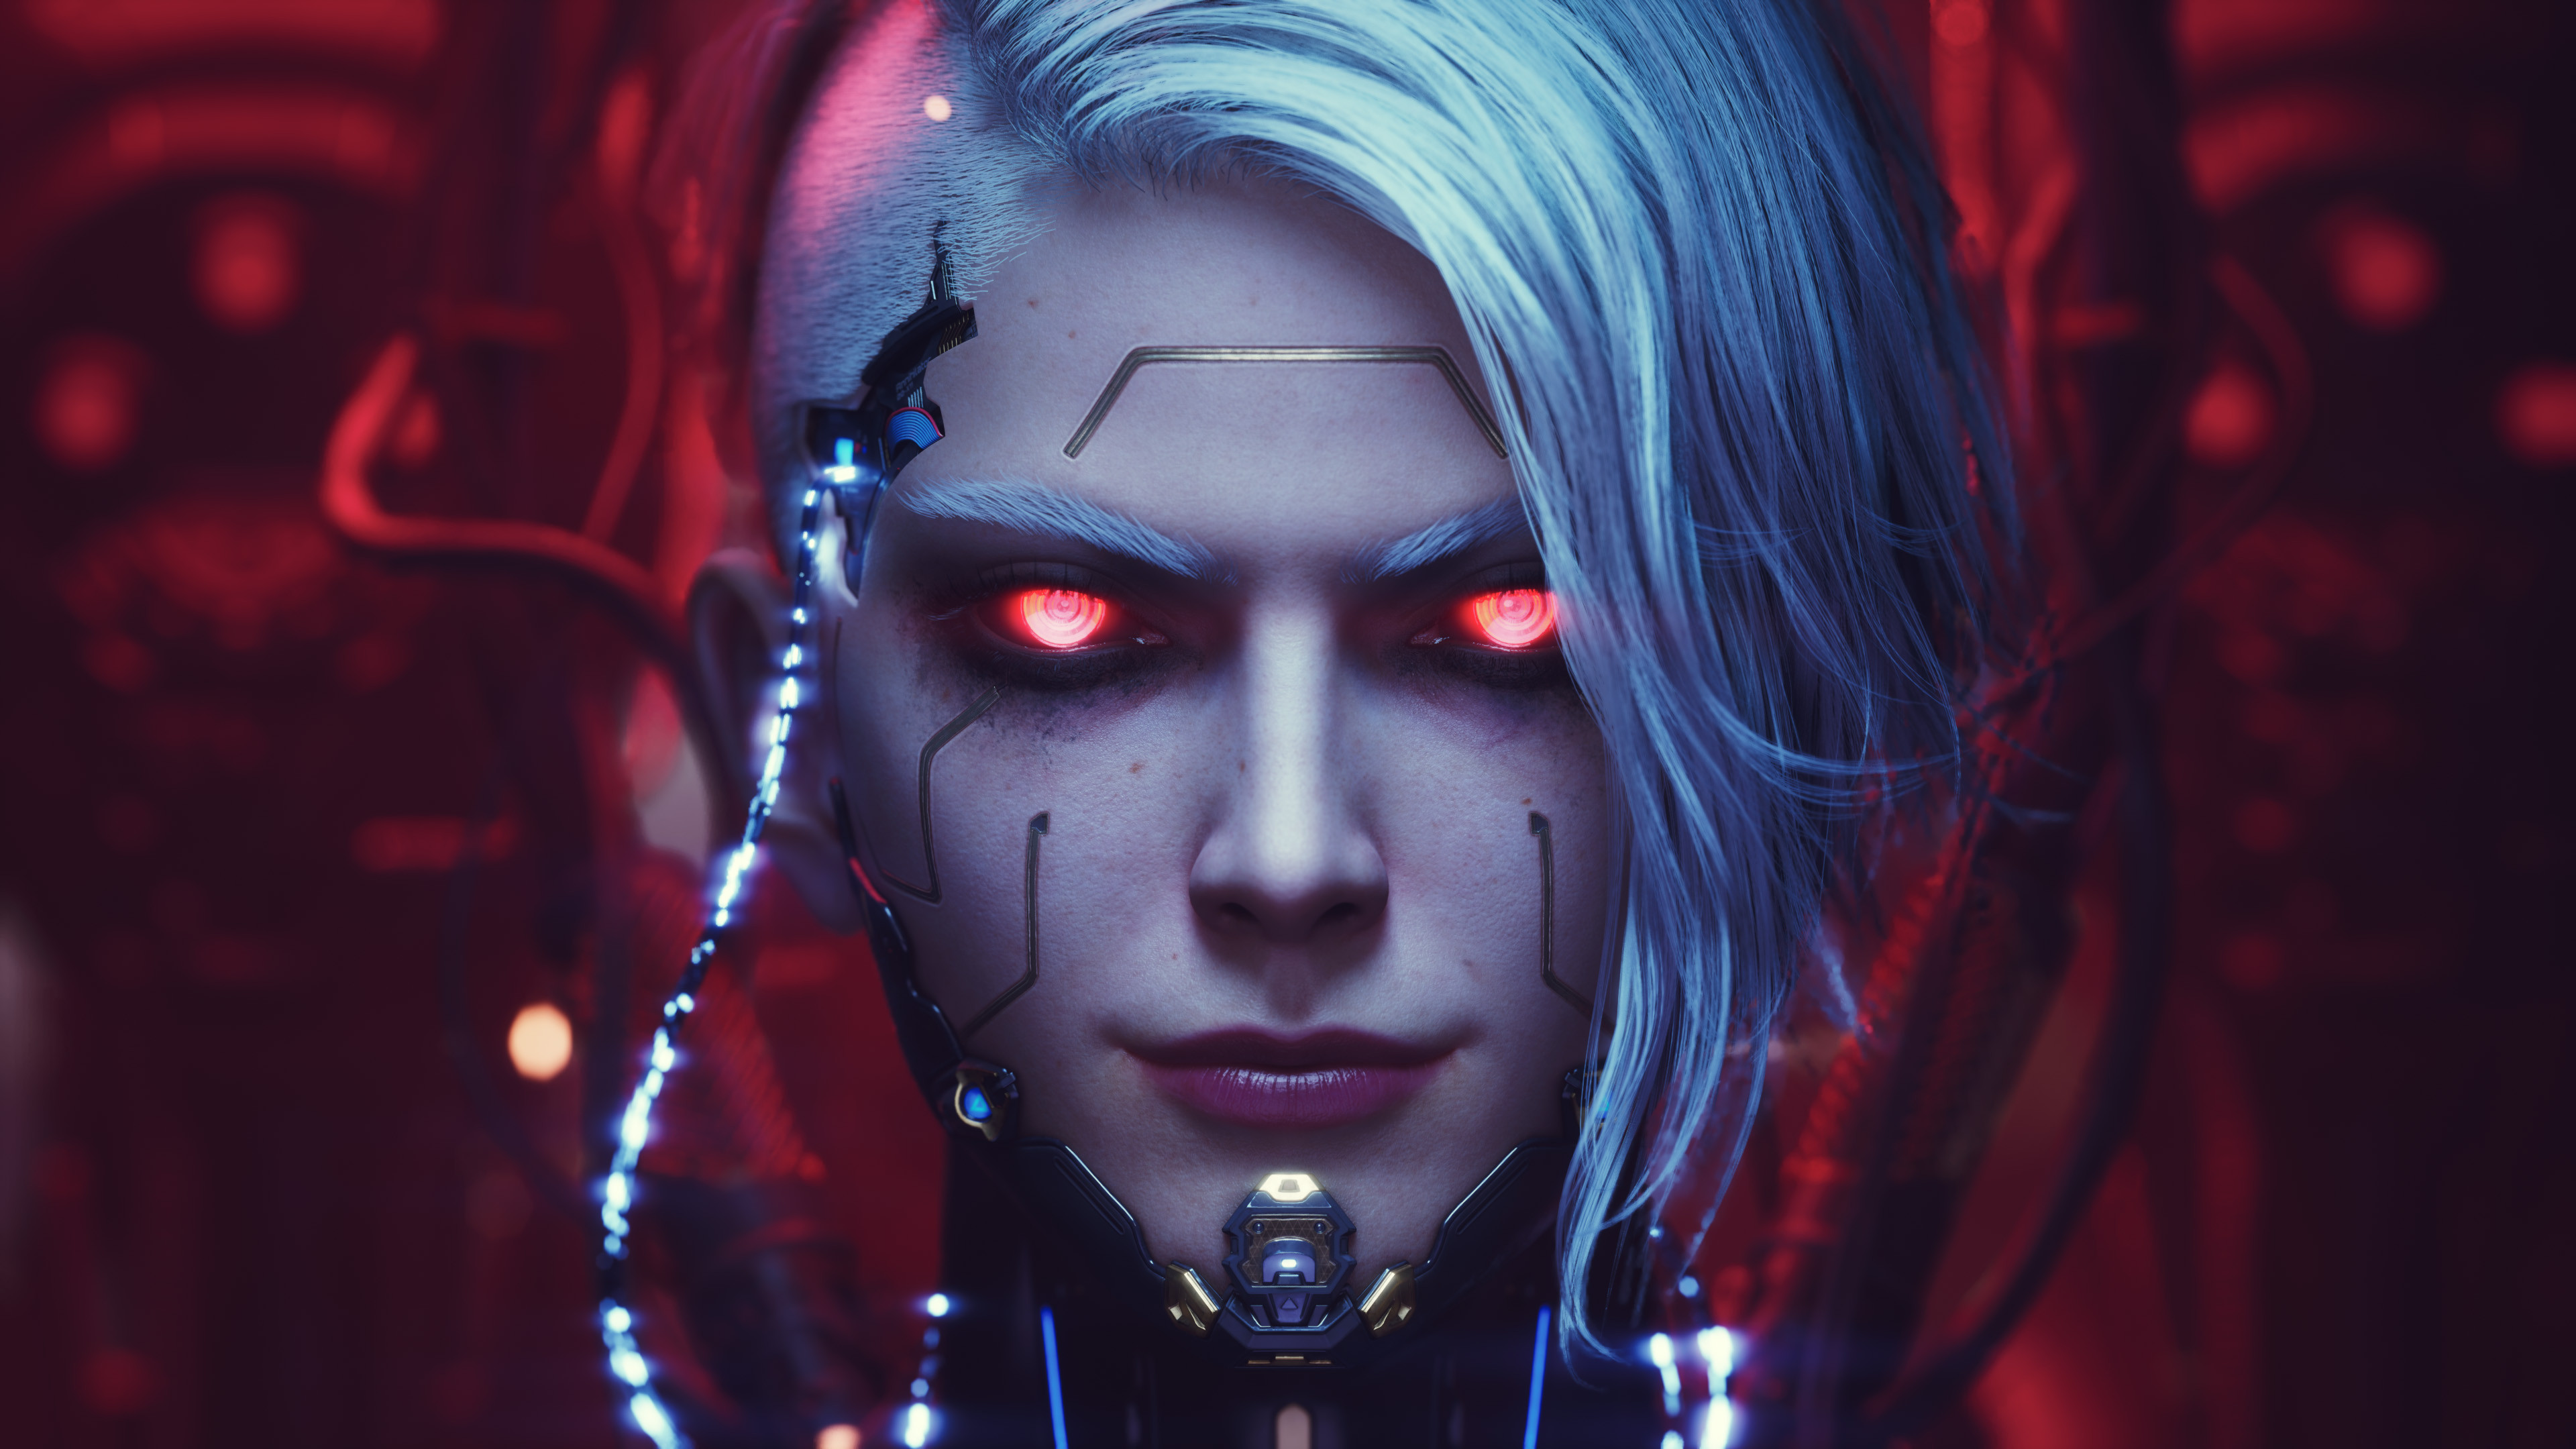 Huifeng Huang CGi Cyberpunk Portrait Wires Red Eyes 3840x2160